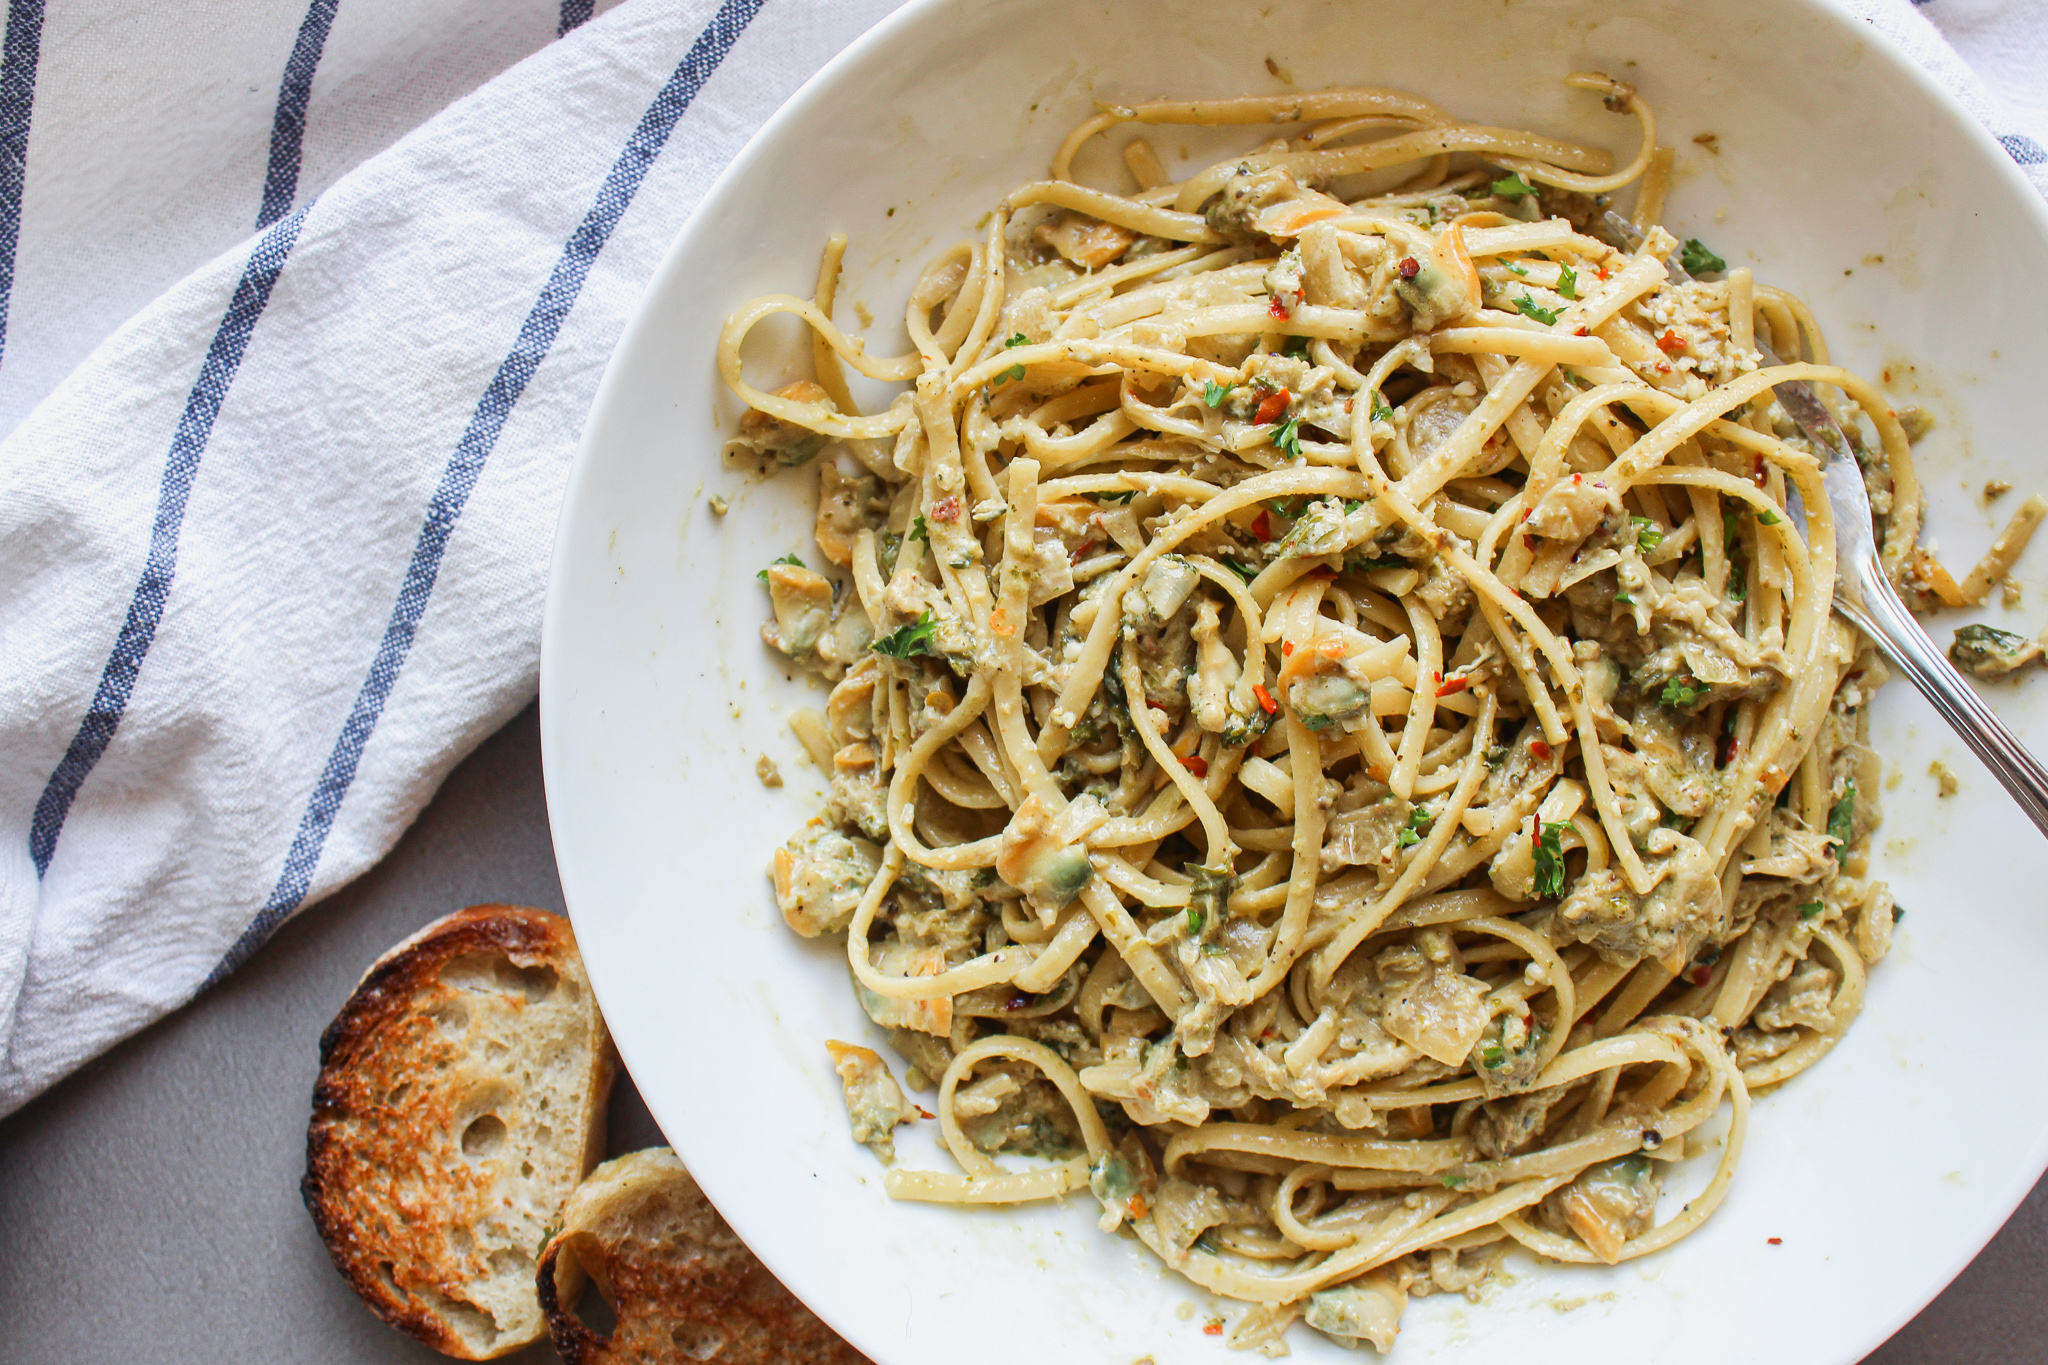 Creamy Canned Clam Pasta with Pesto